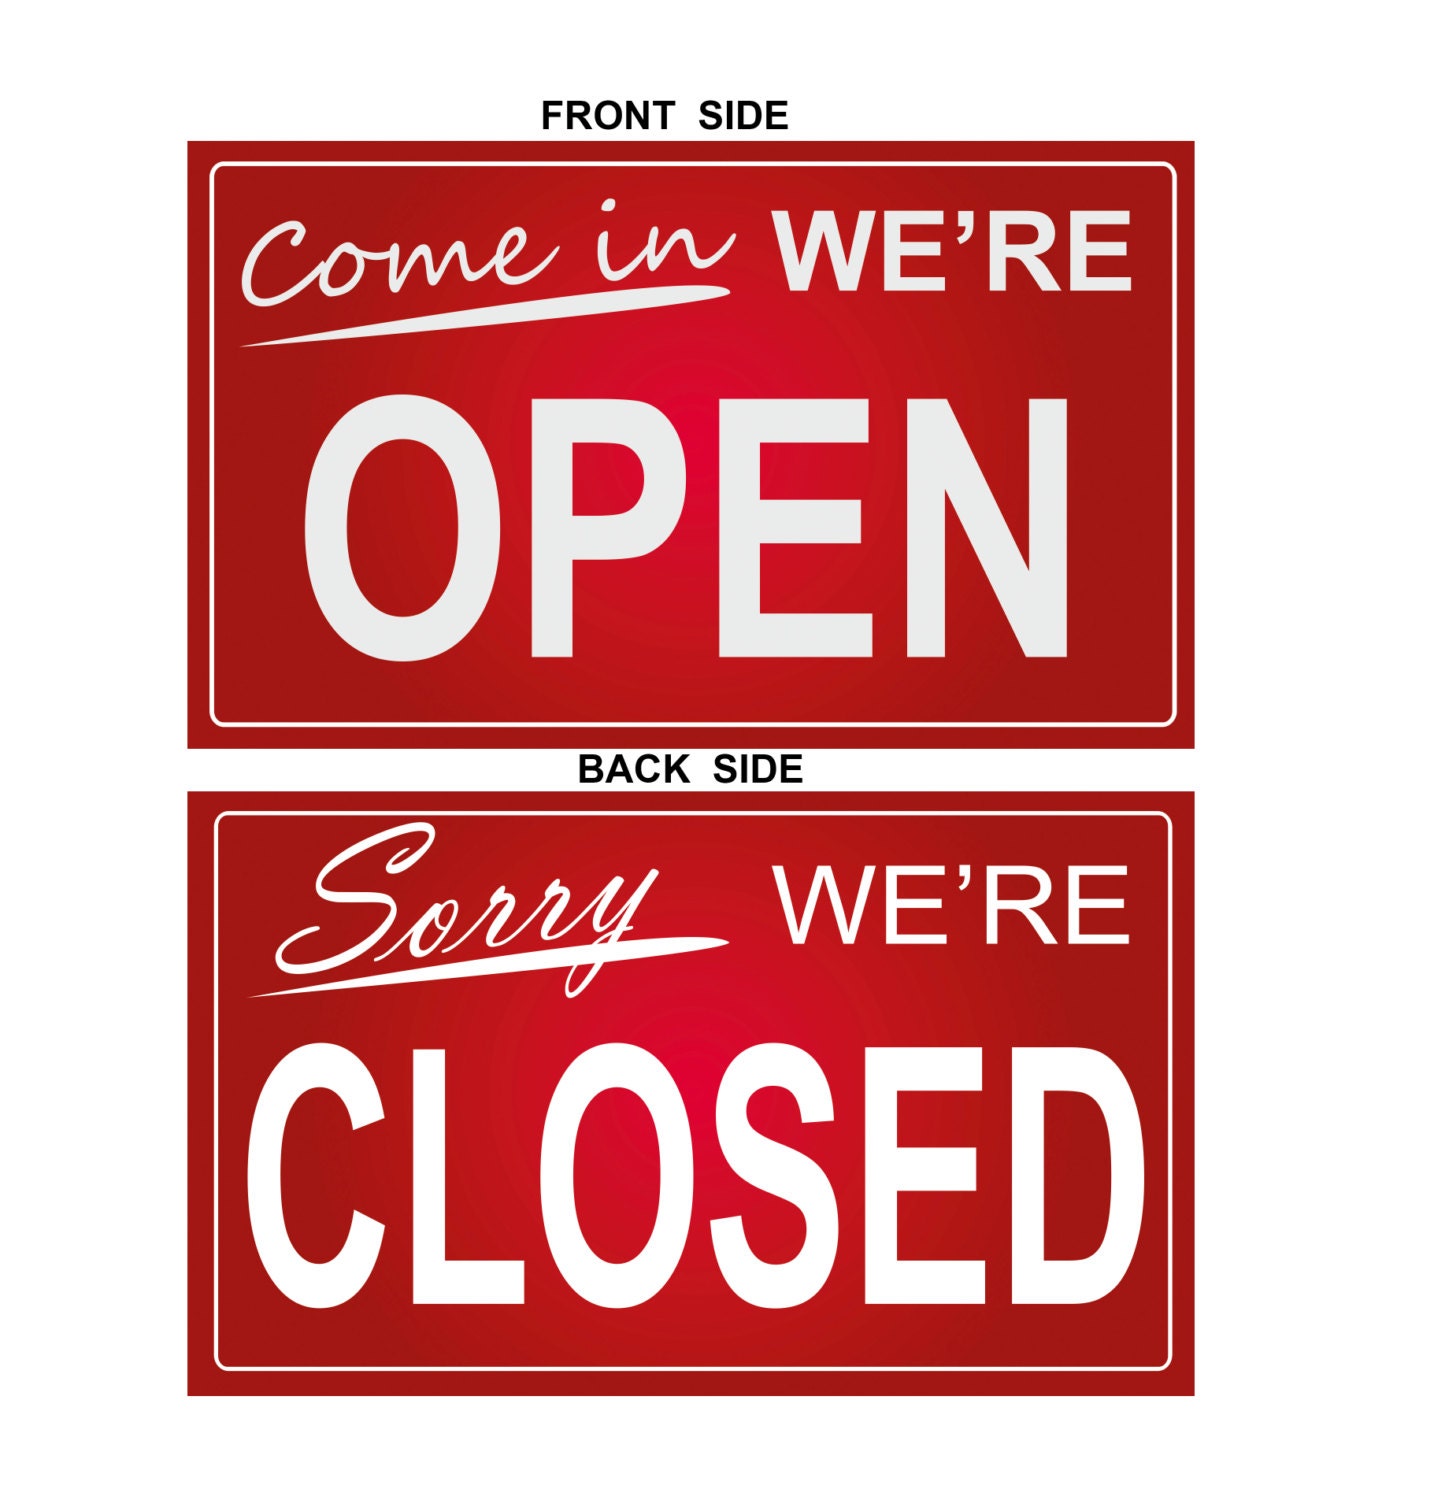 OPEN CLOSED SIGN Store Open Closed Sign Red Open Closed